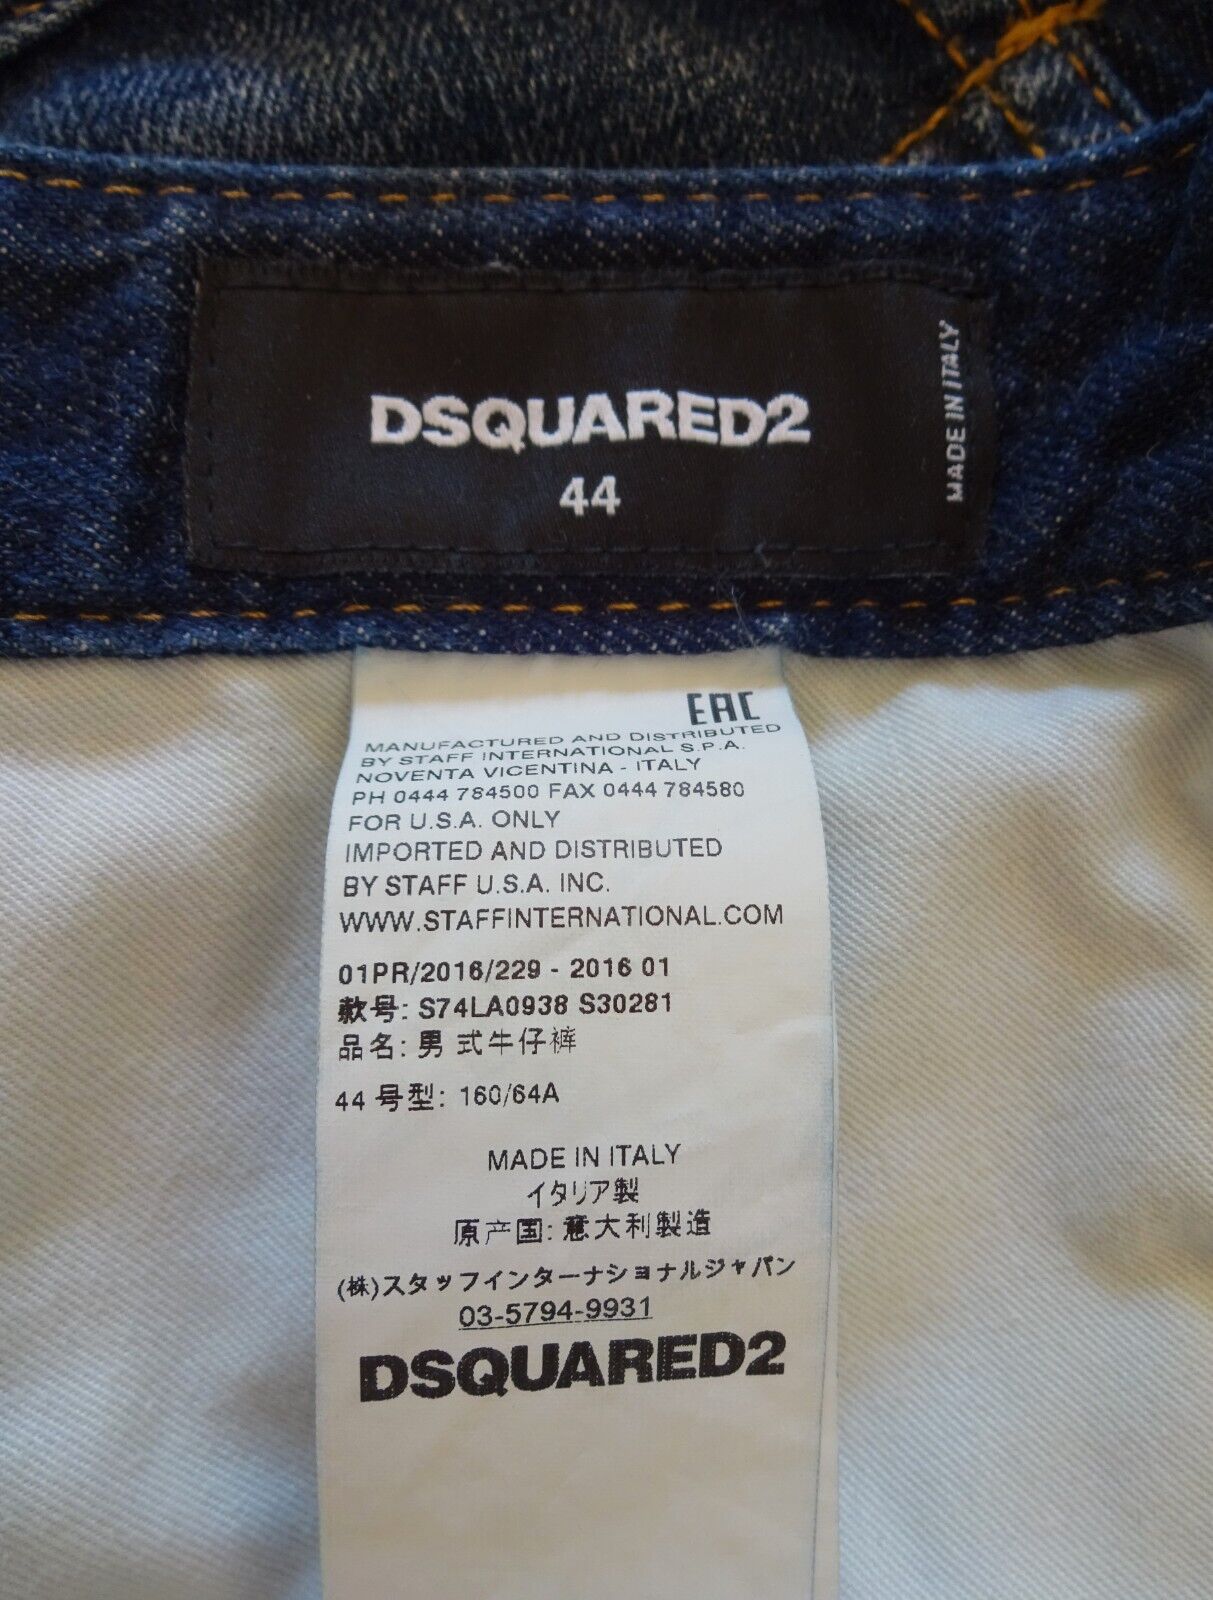 DSQUARED2 TIDY BIKER JEANS WITH PATCHES - MADE IN ITALY - SIZE 44 